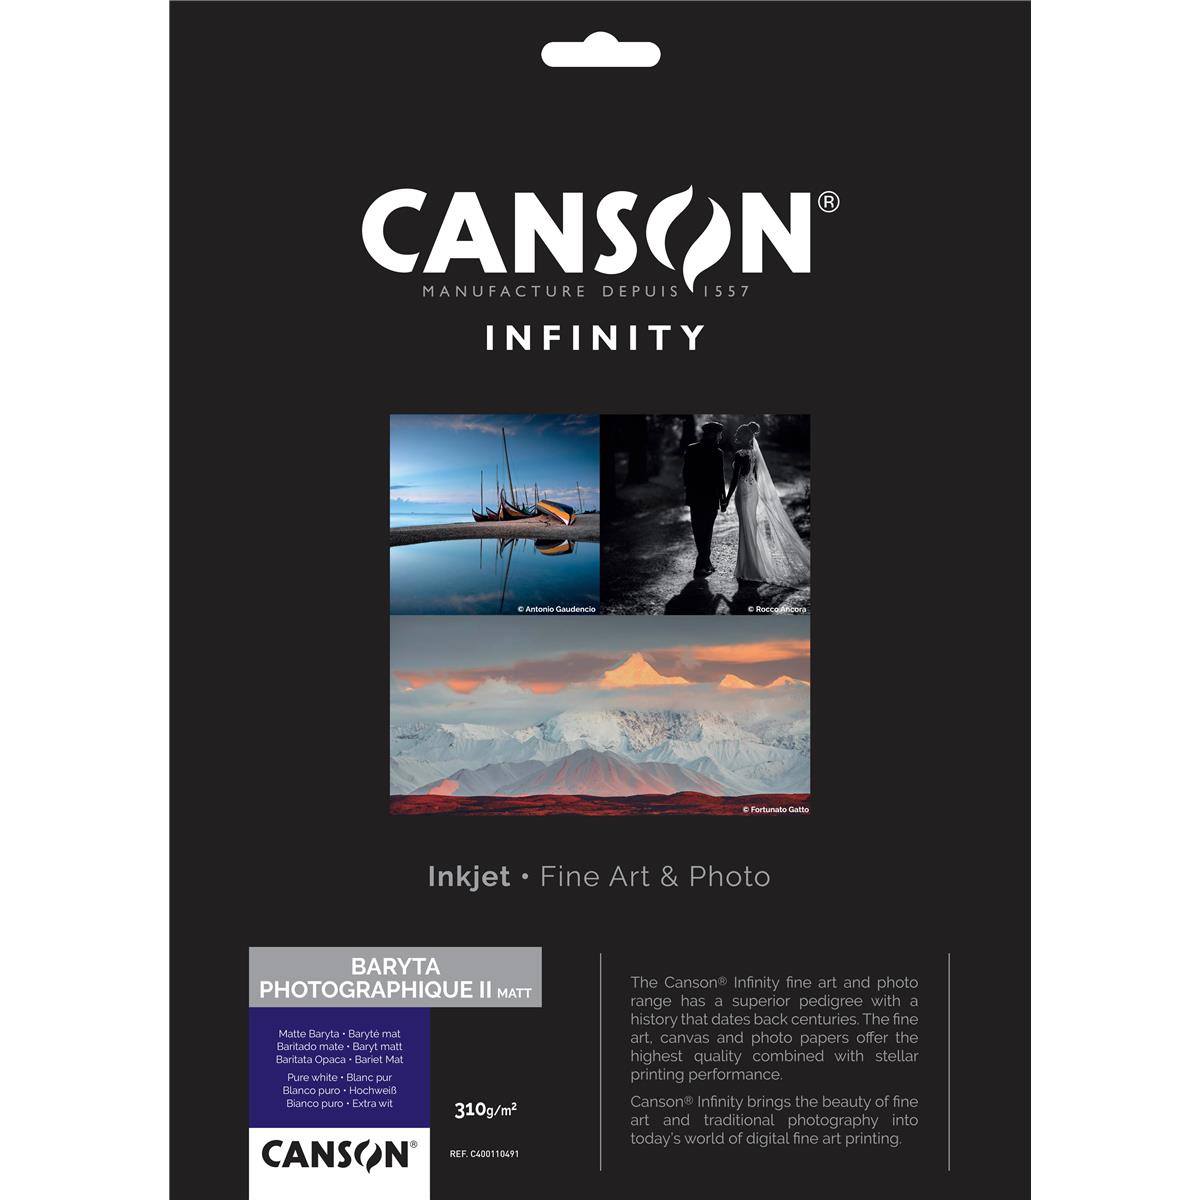 Image of Canson Infinity Baryta Photographique II Matte Paper